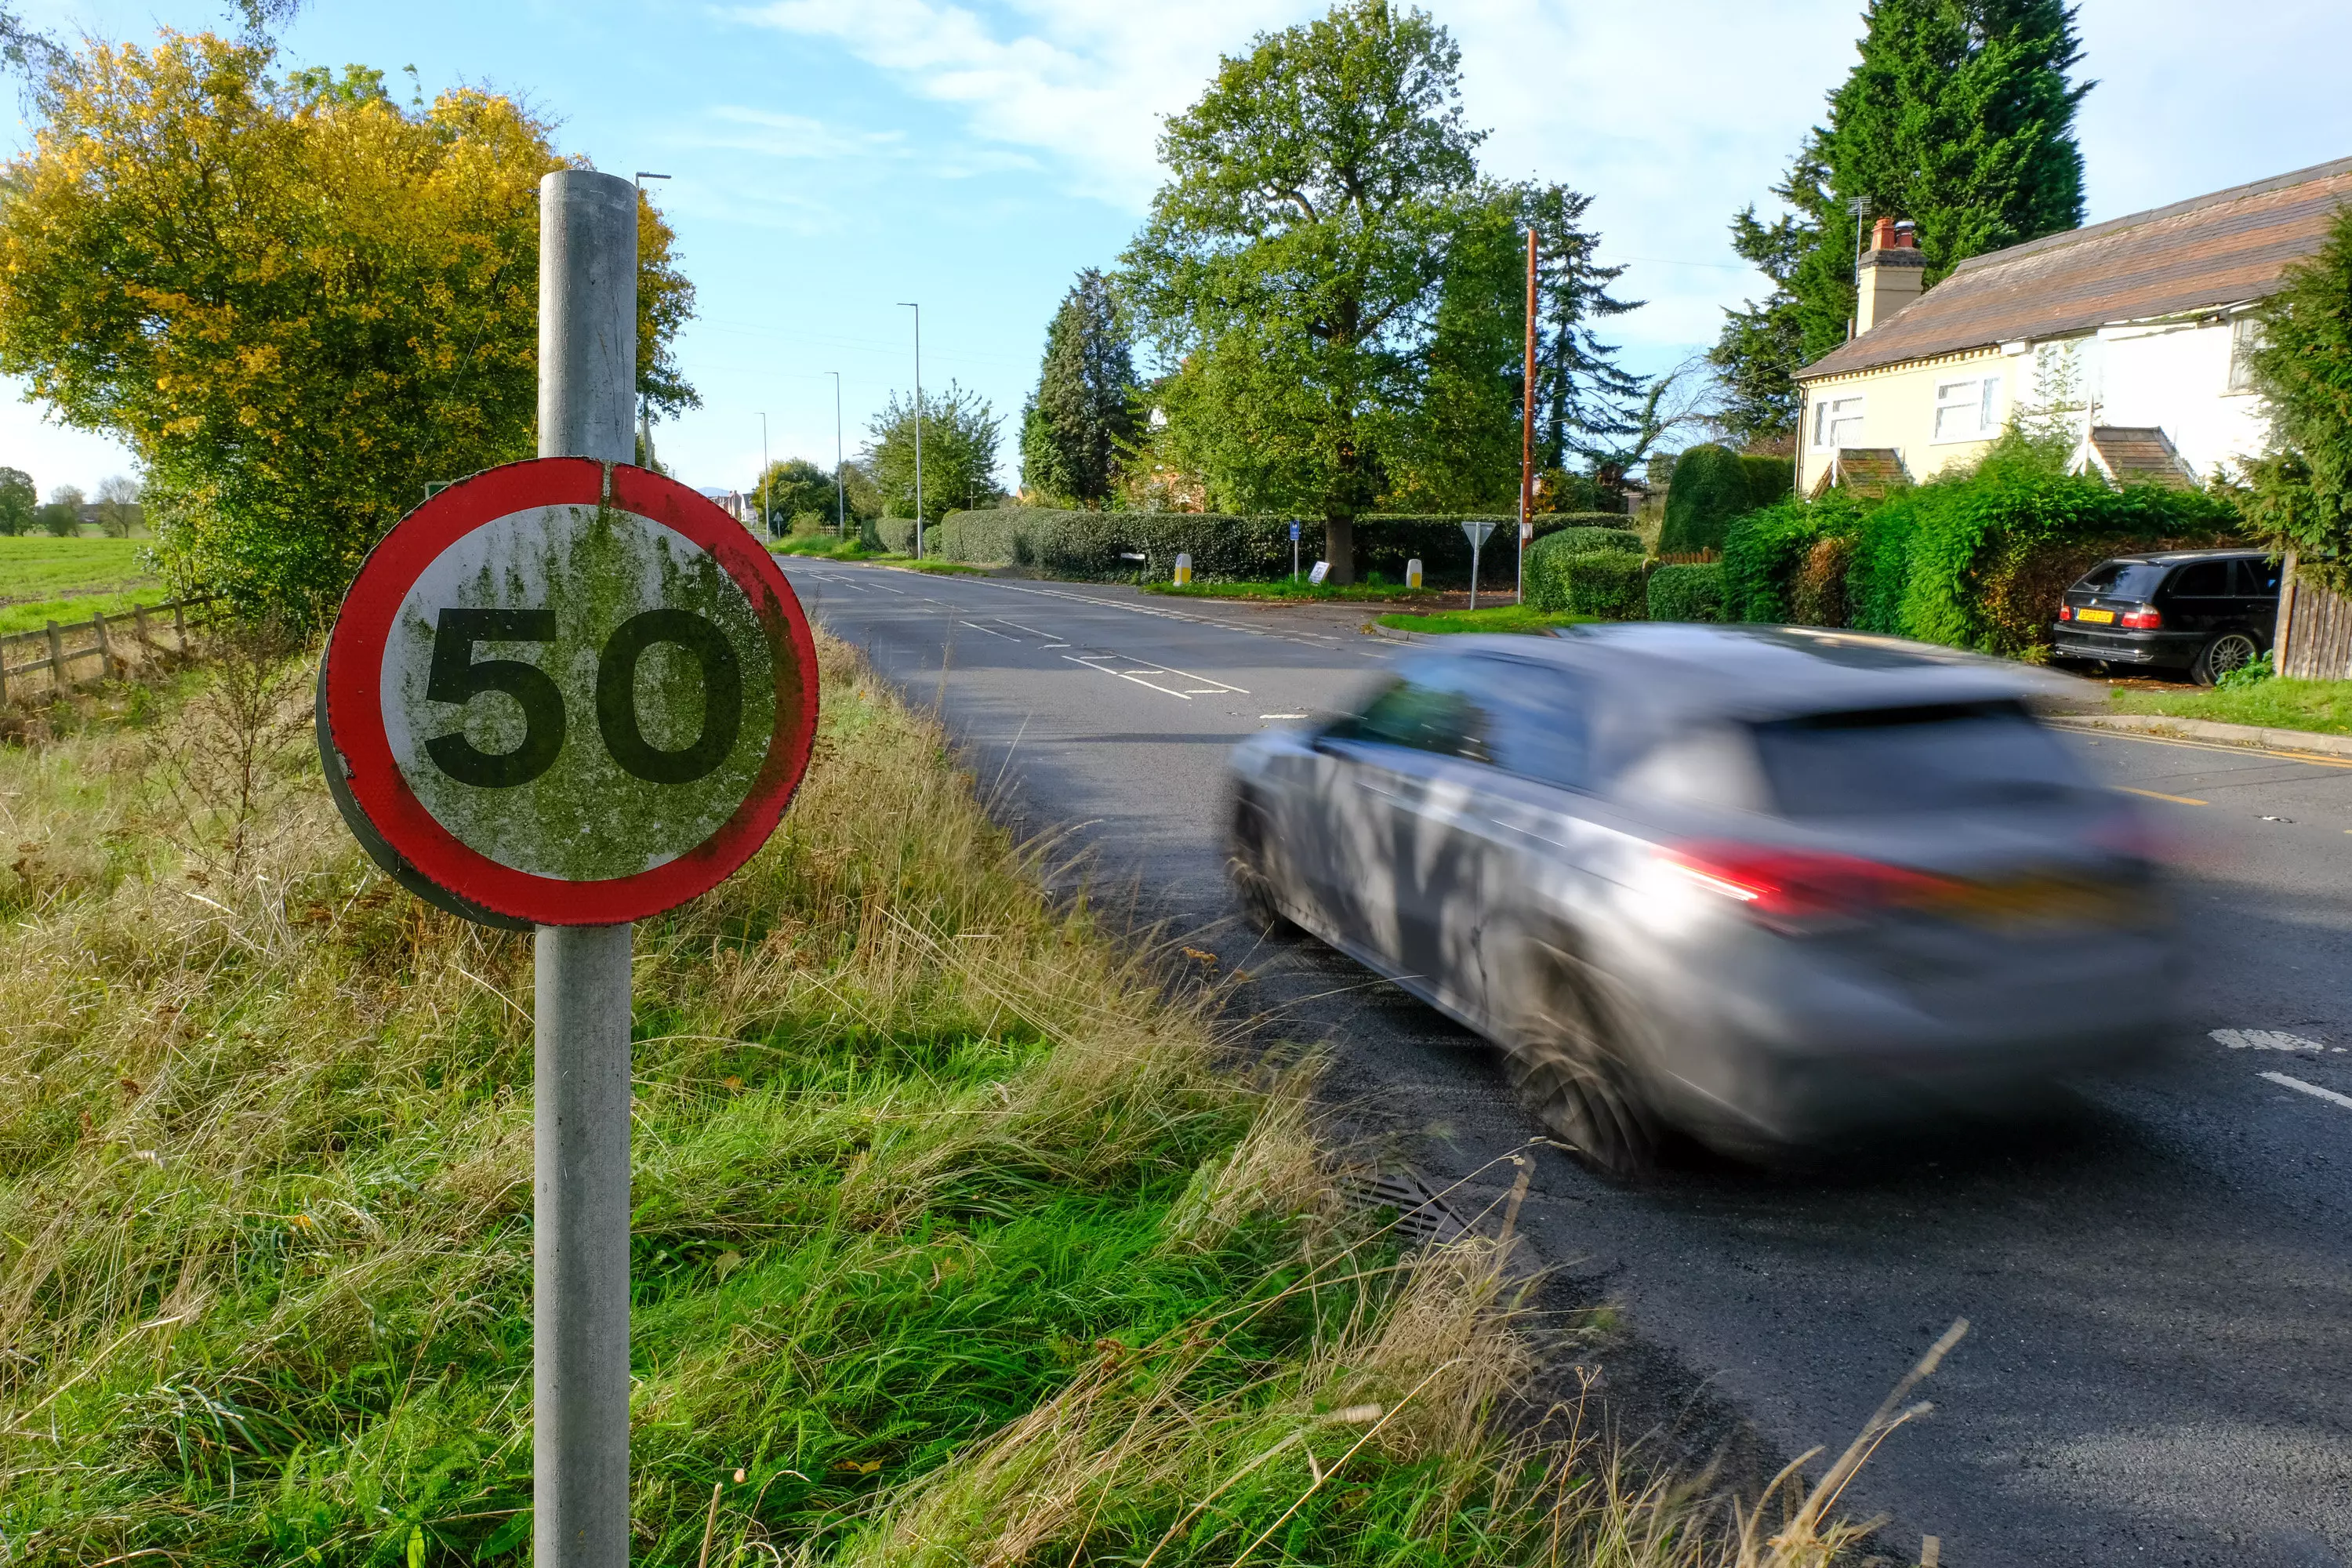 The road used to have a 50mph speed limit.